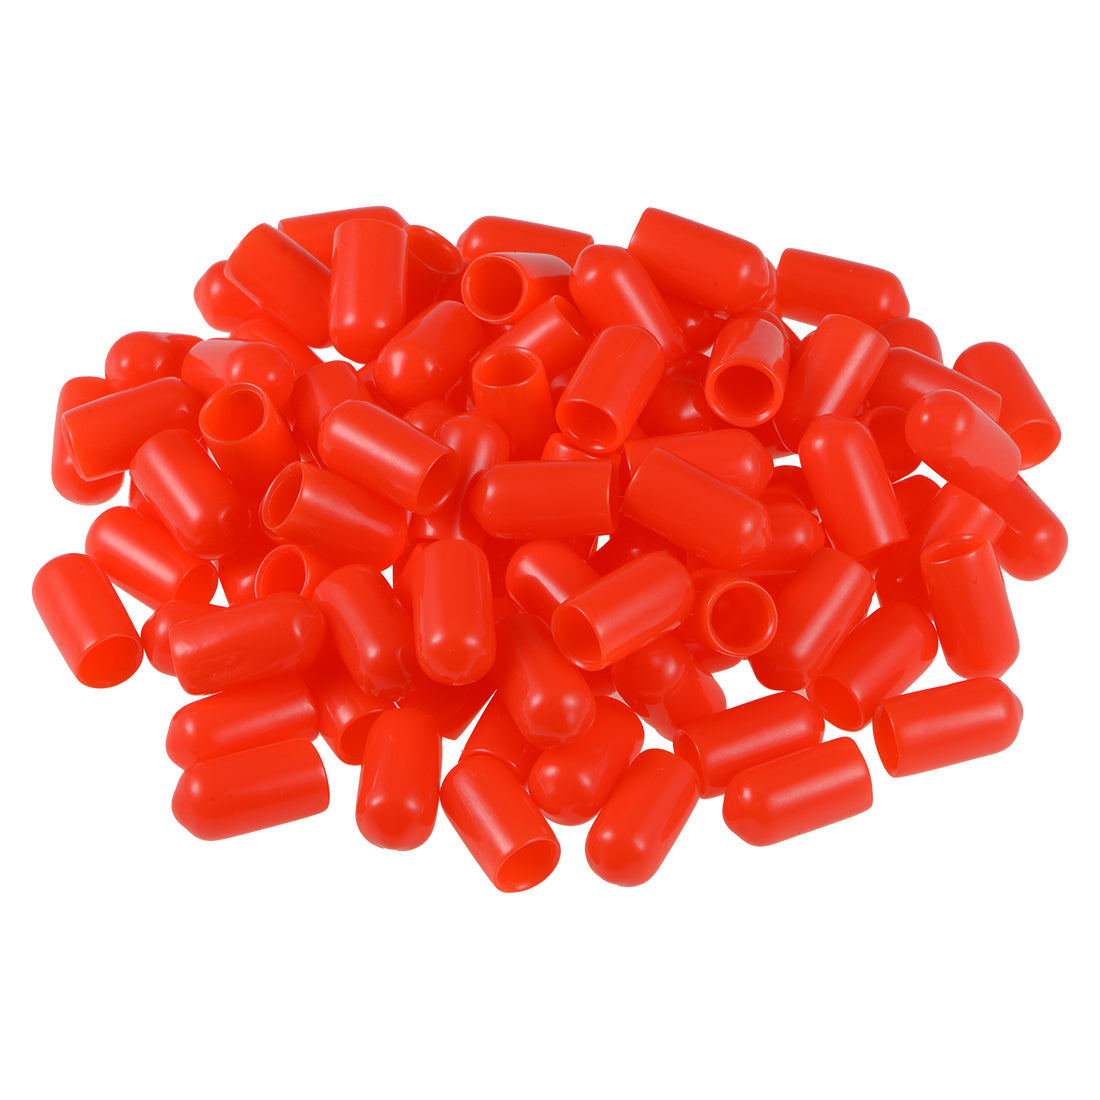 uxcell Uxcell 200pcs Rubber End Caps 6.5mm ID 15mm Height Screw Thread Protectors Red